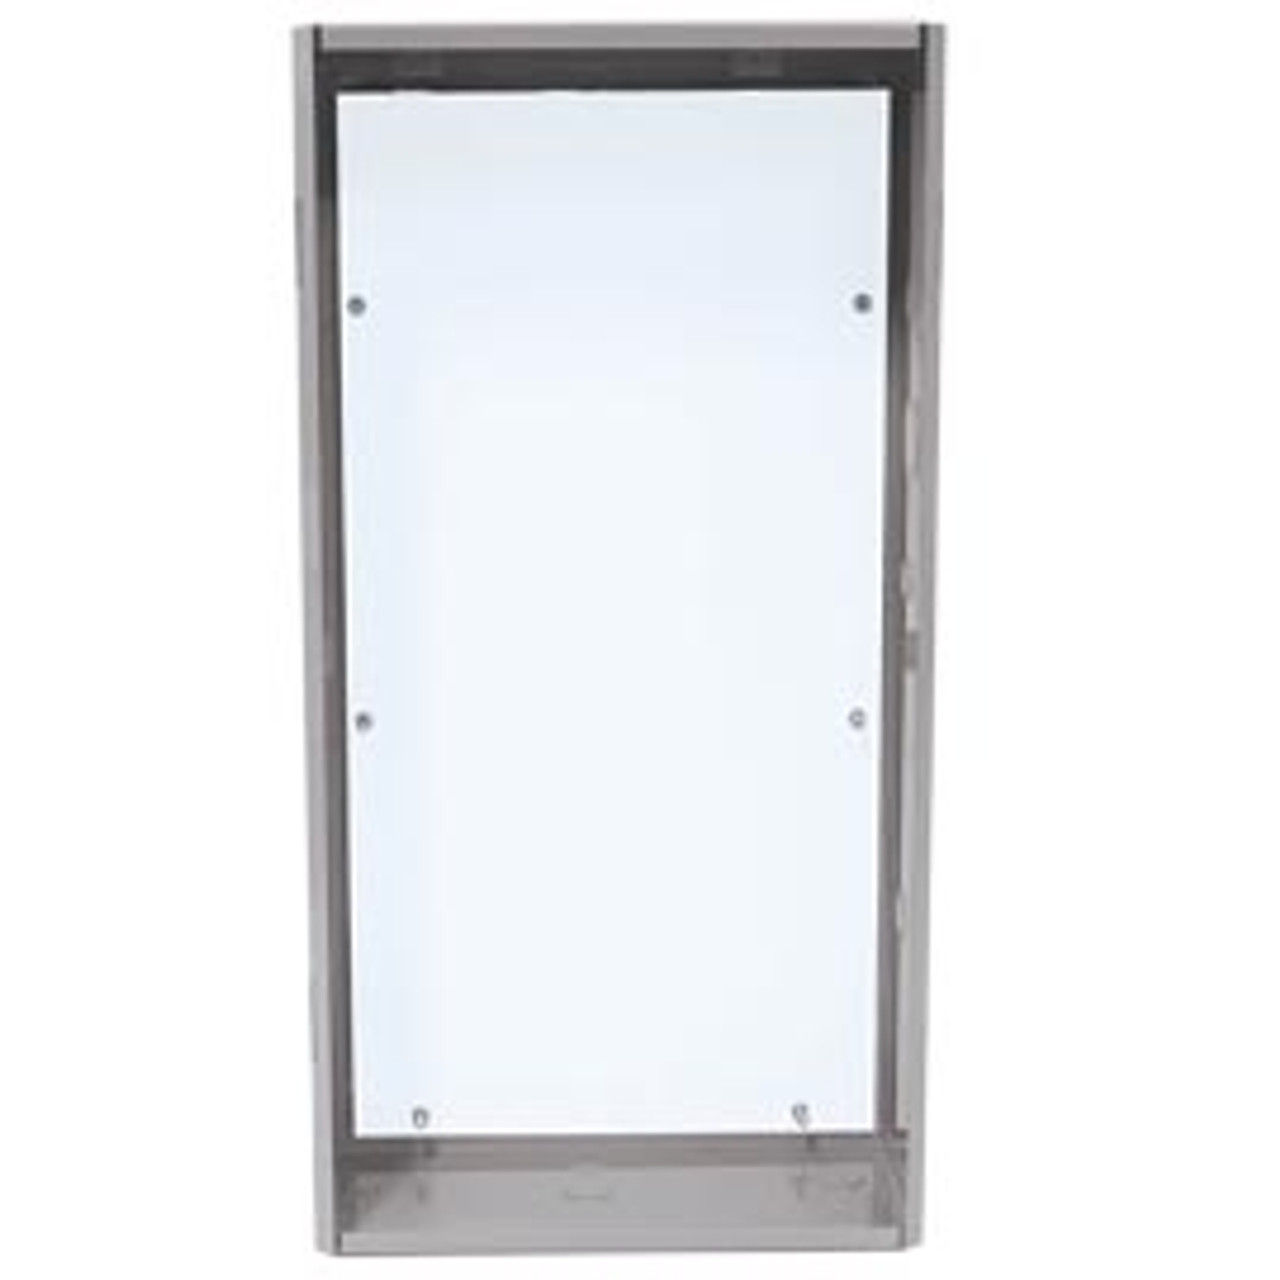 FUNCTIONAL DEVICES FUNSP3803L MH3800 Subpanel Polymetal 23.00H x 11.75W x 0.13T